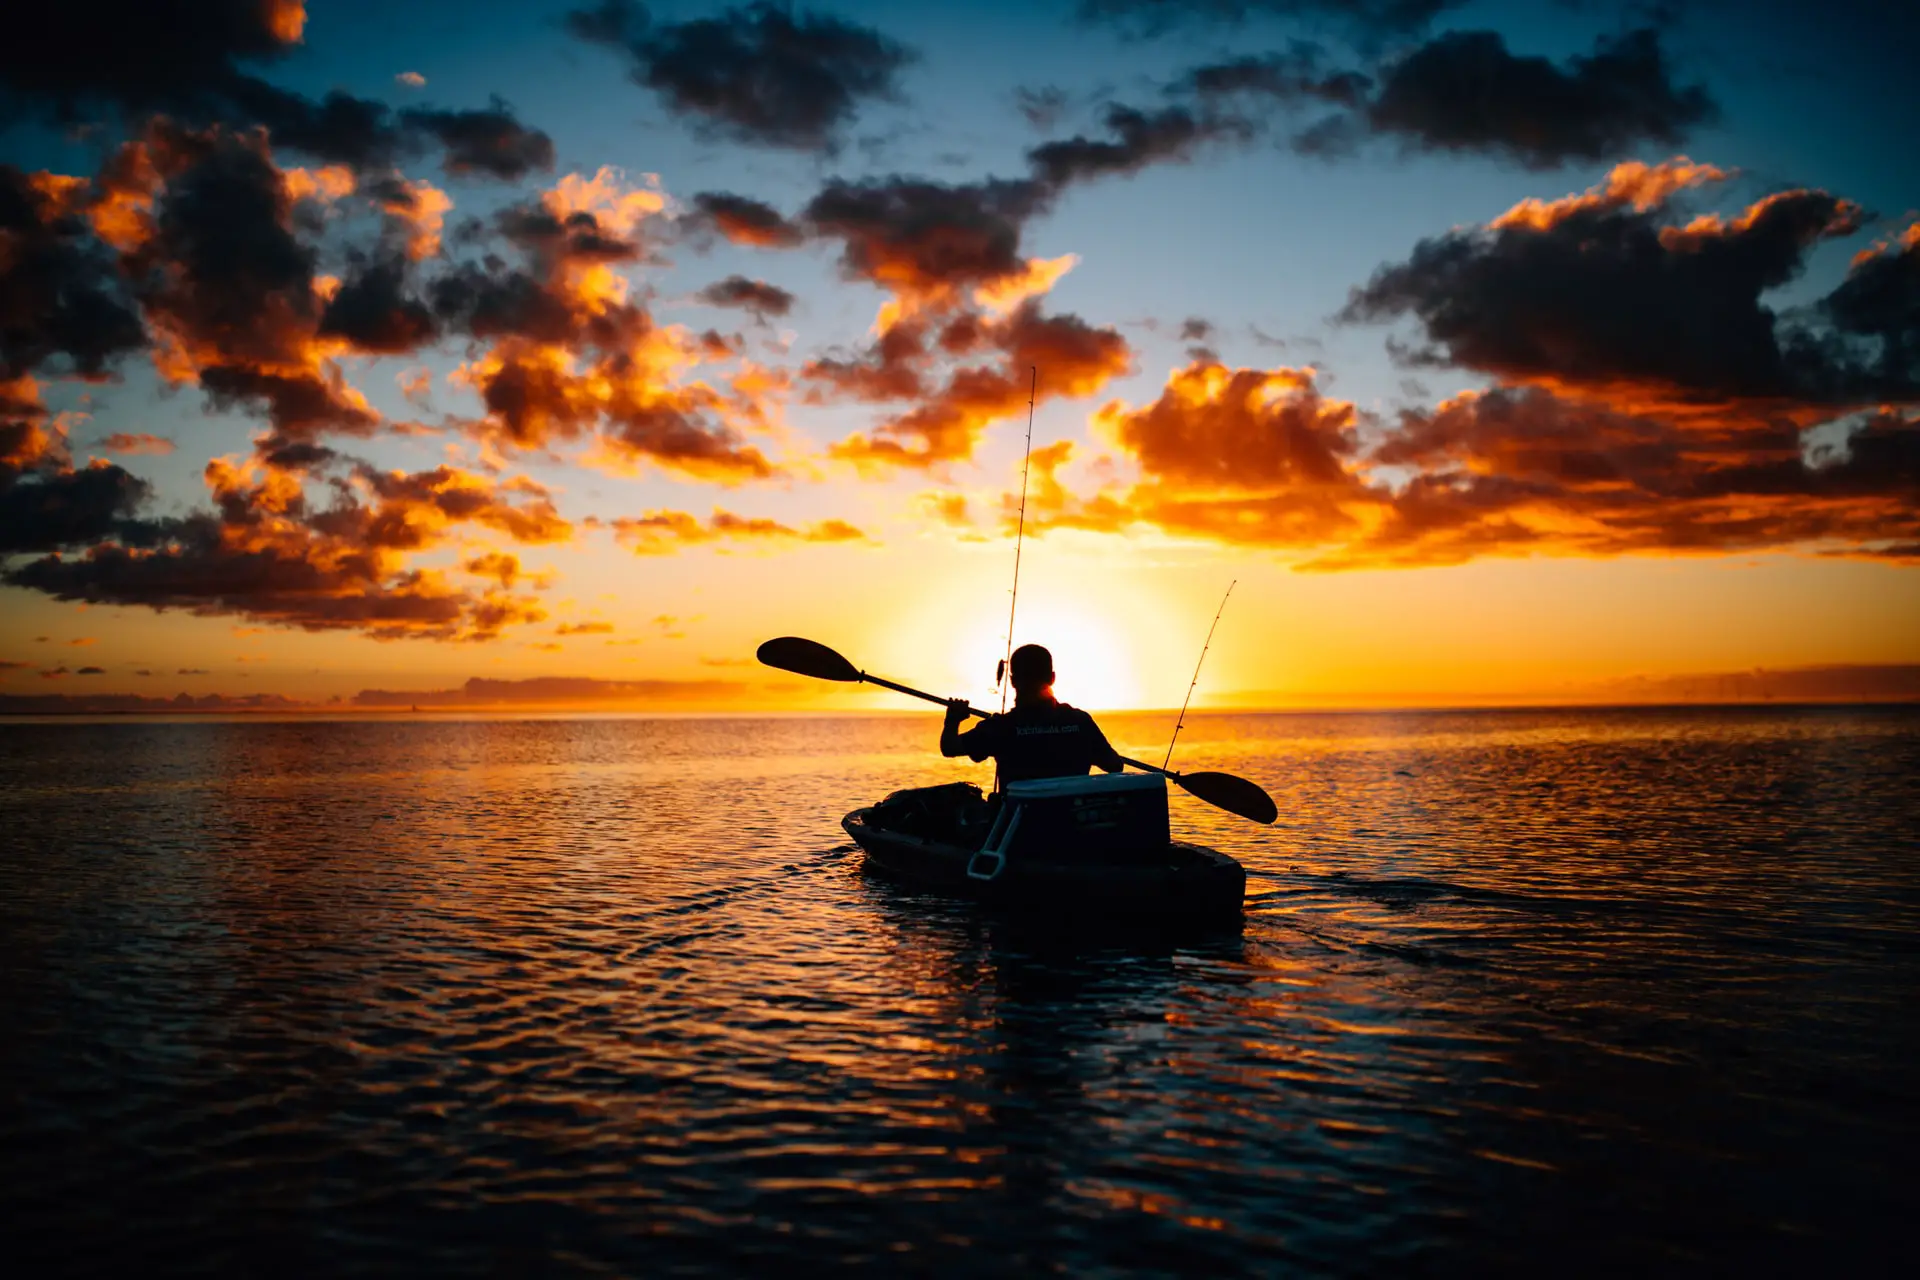 7 Of The Best Places To Go Kayaking In Ontario - best places to kayak